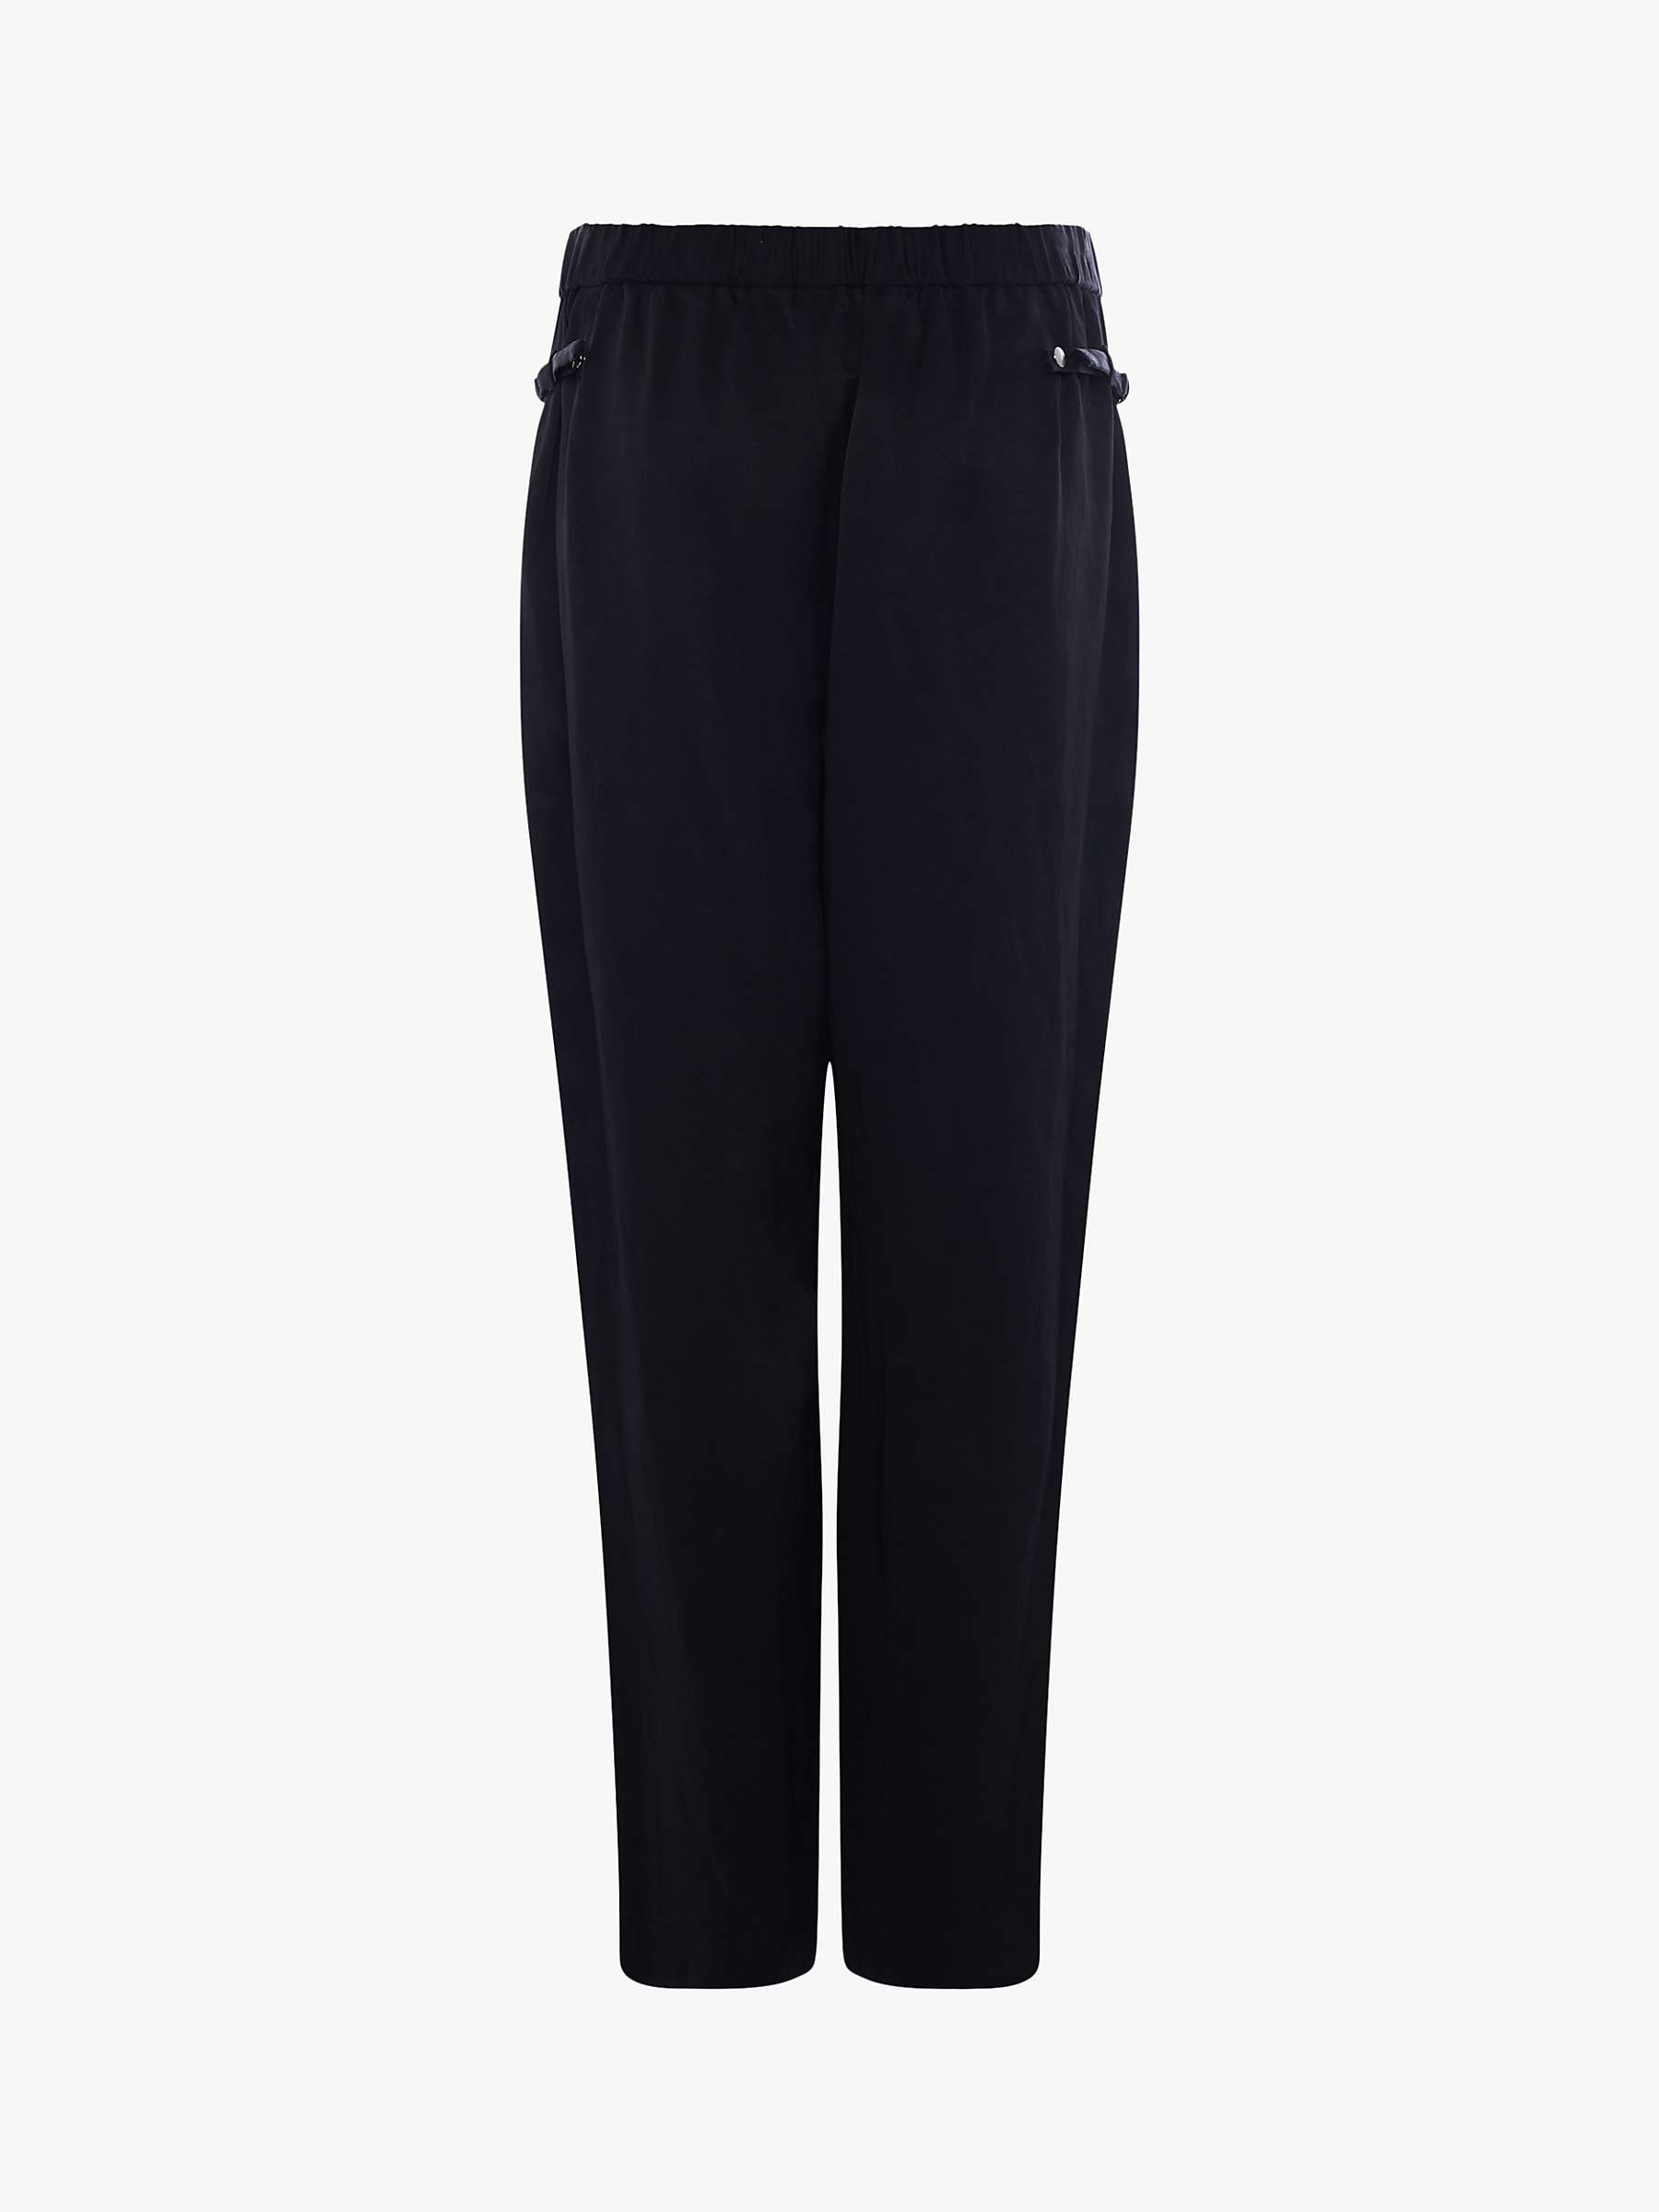 Buy French Connection Carena Tailored Trousers Online at johnlewis.com